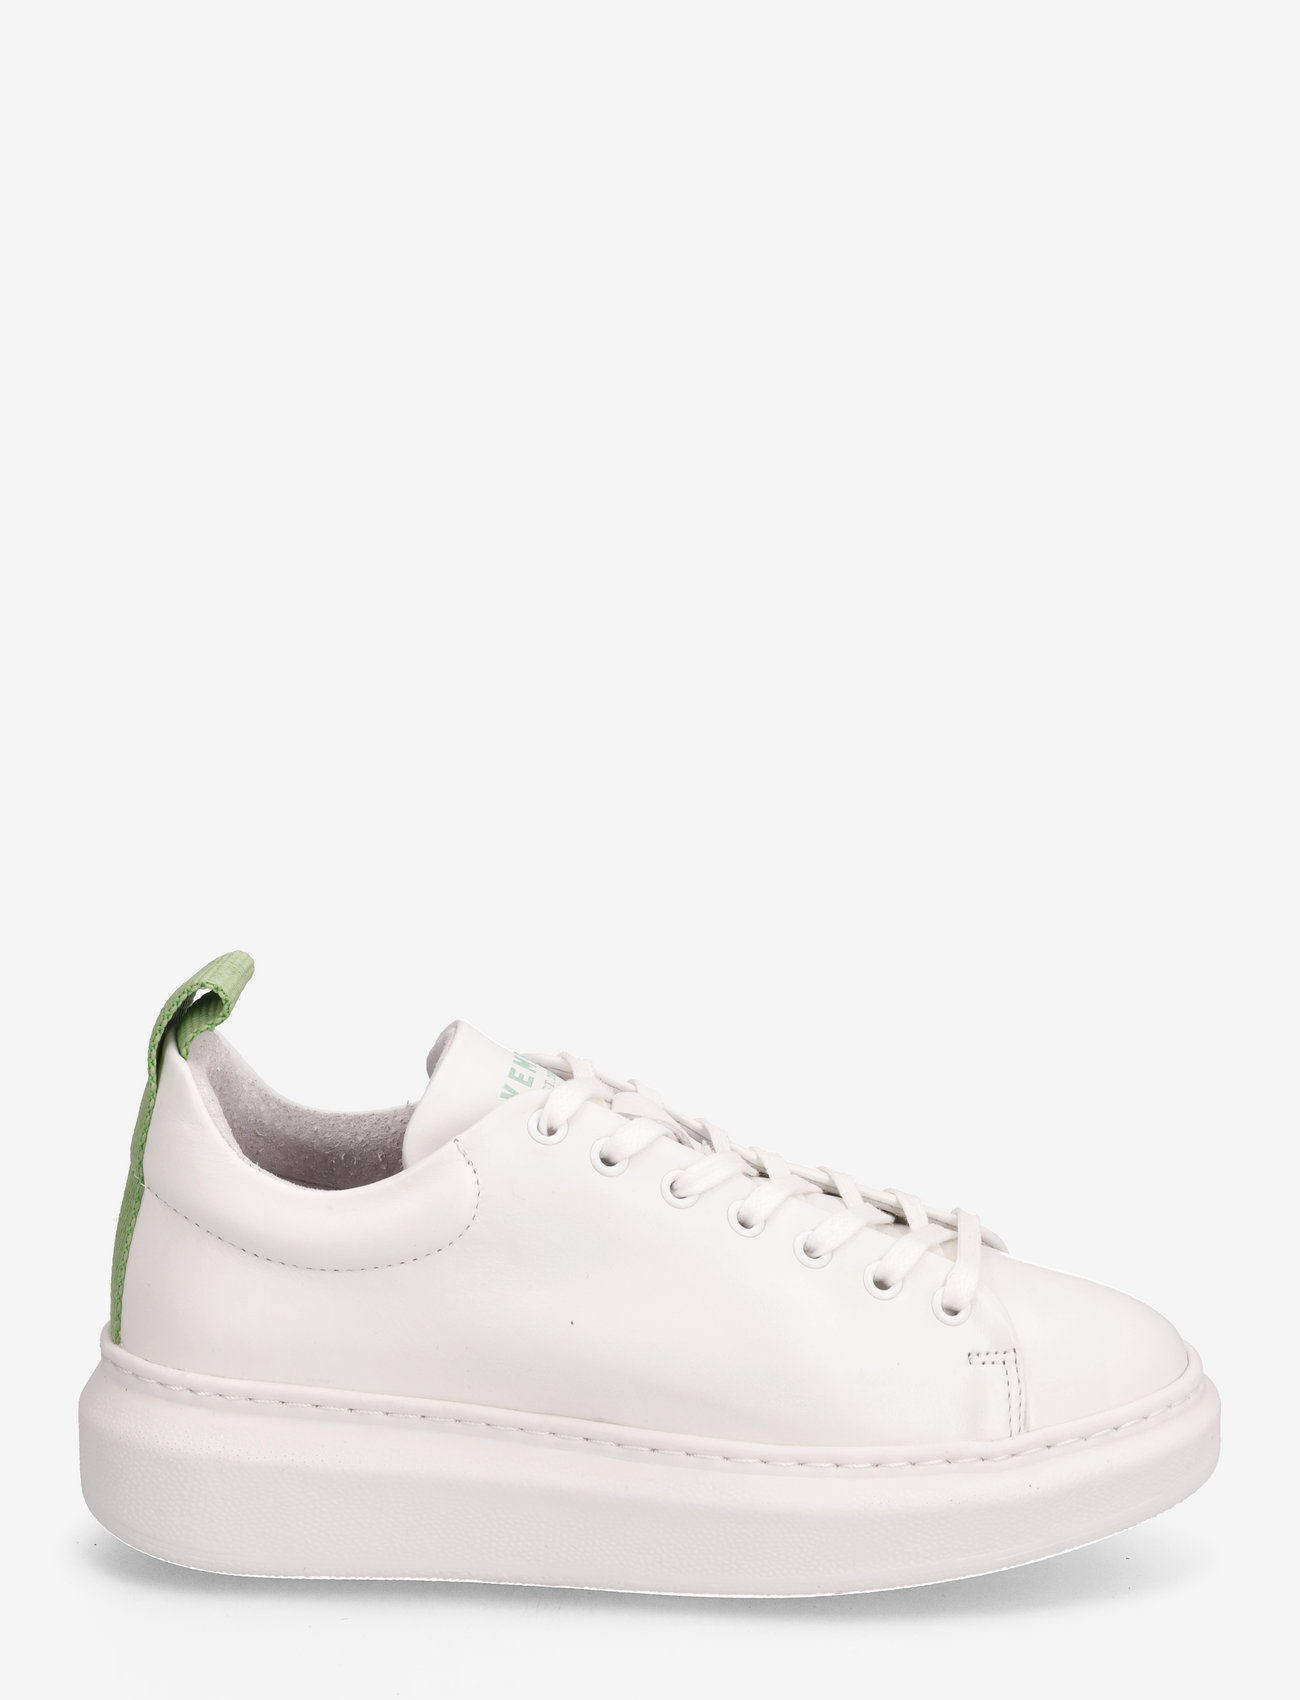 Pavement - Dee color - low top sneakers - white/green 424 - 1